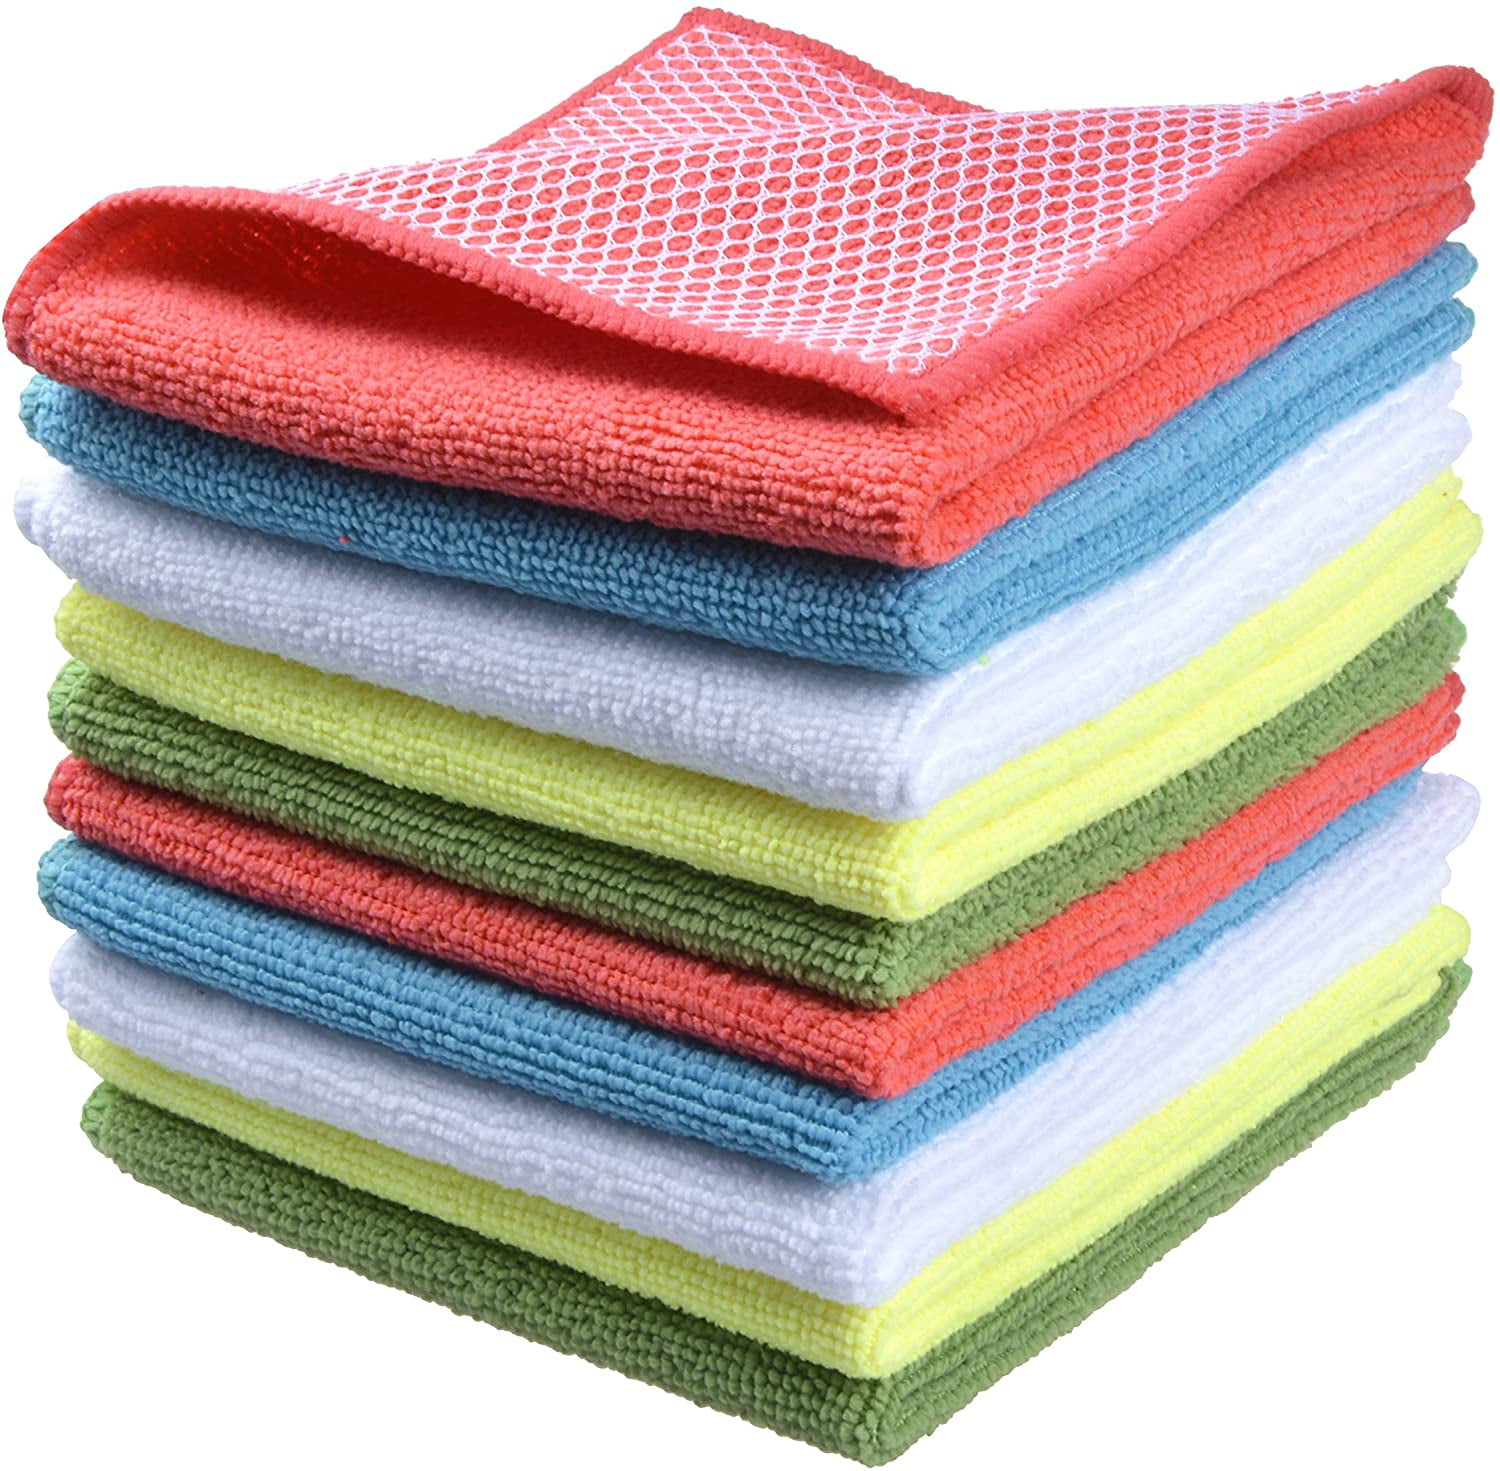 SINLAND Absorbent Microfiber Dish Cloth Kitchen Streak Free Cleaning Cloth Dish Rags Lens Cloths Dish Towels 30cmx30cm Pack of 12 Grey, 12 